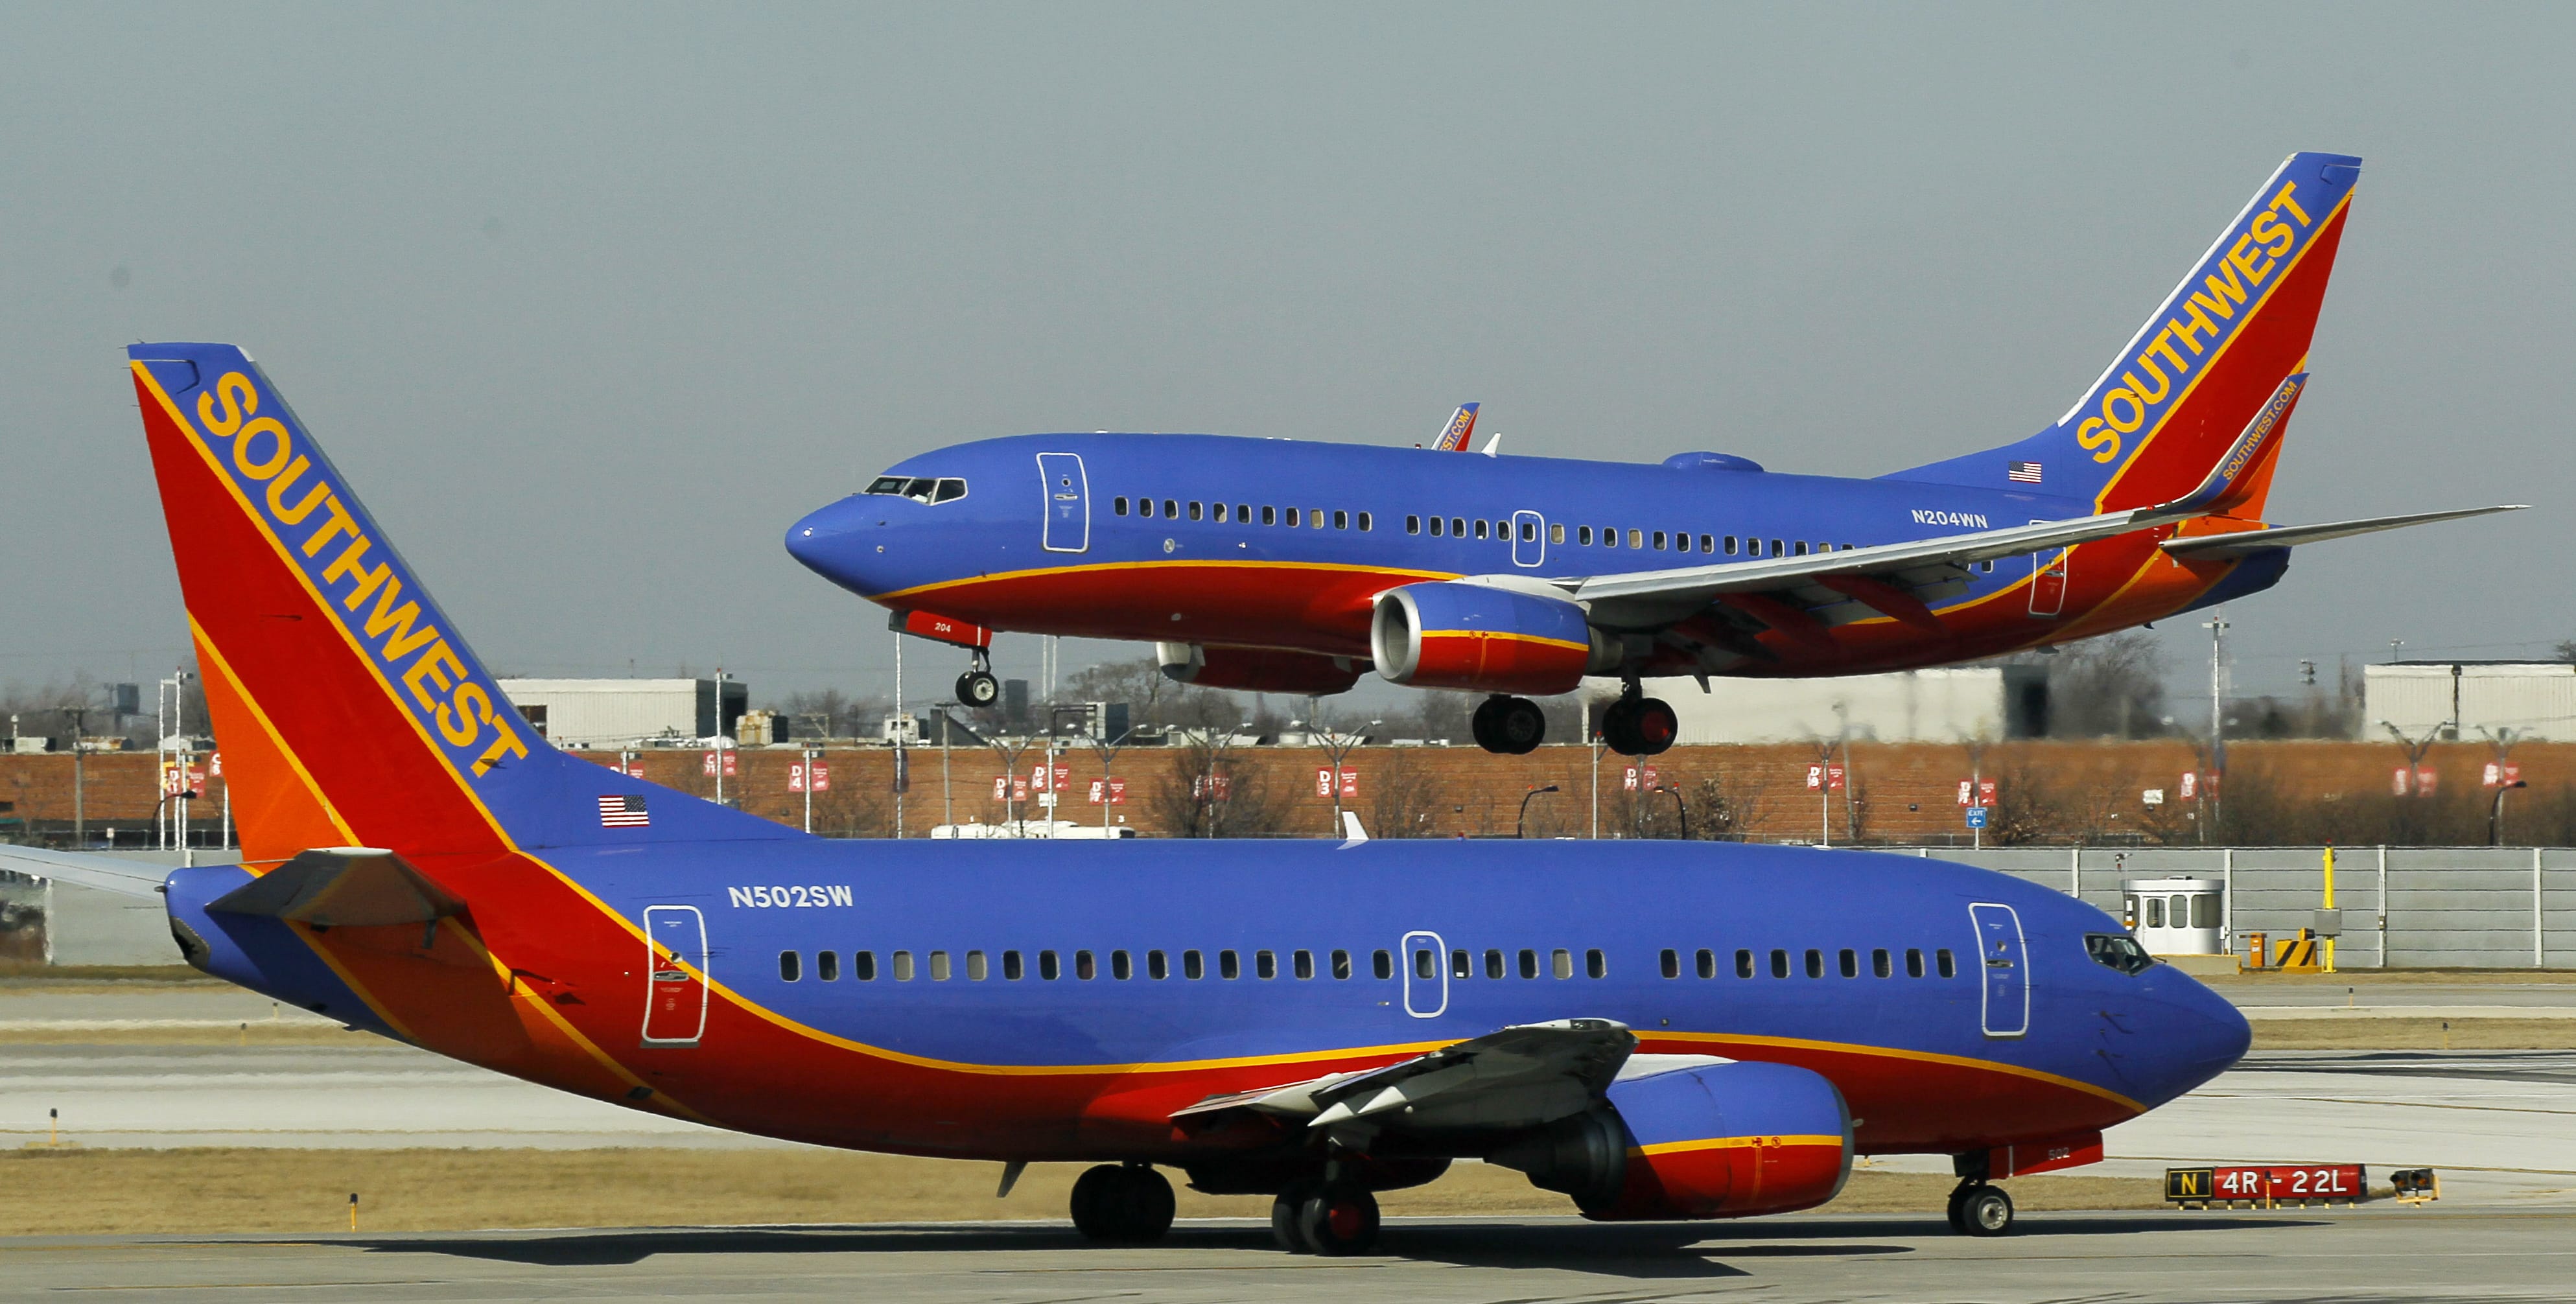 A Southwest Airlines Boeing 737 waits to take off at Chicago's Midway Airport as another lands.